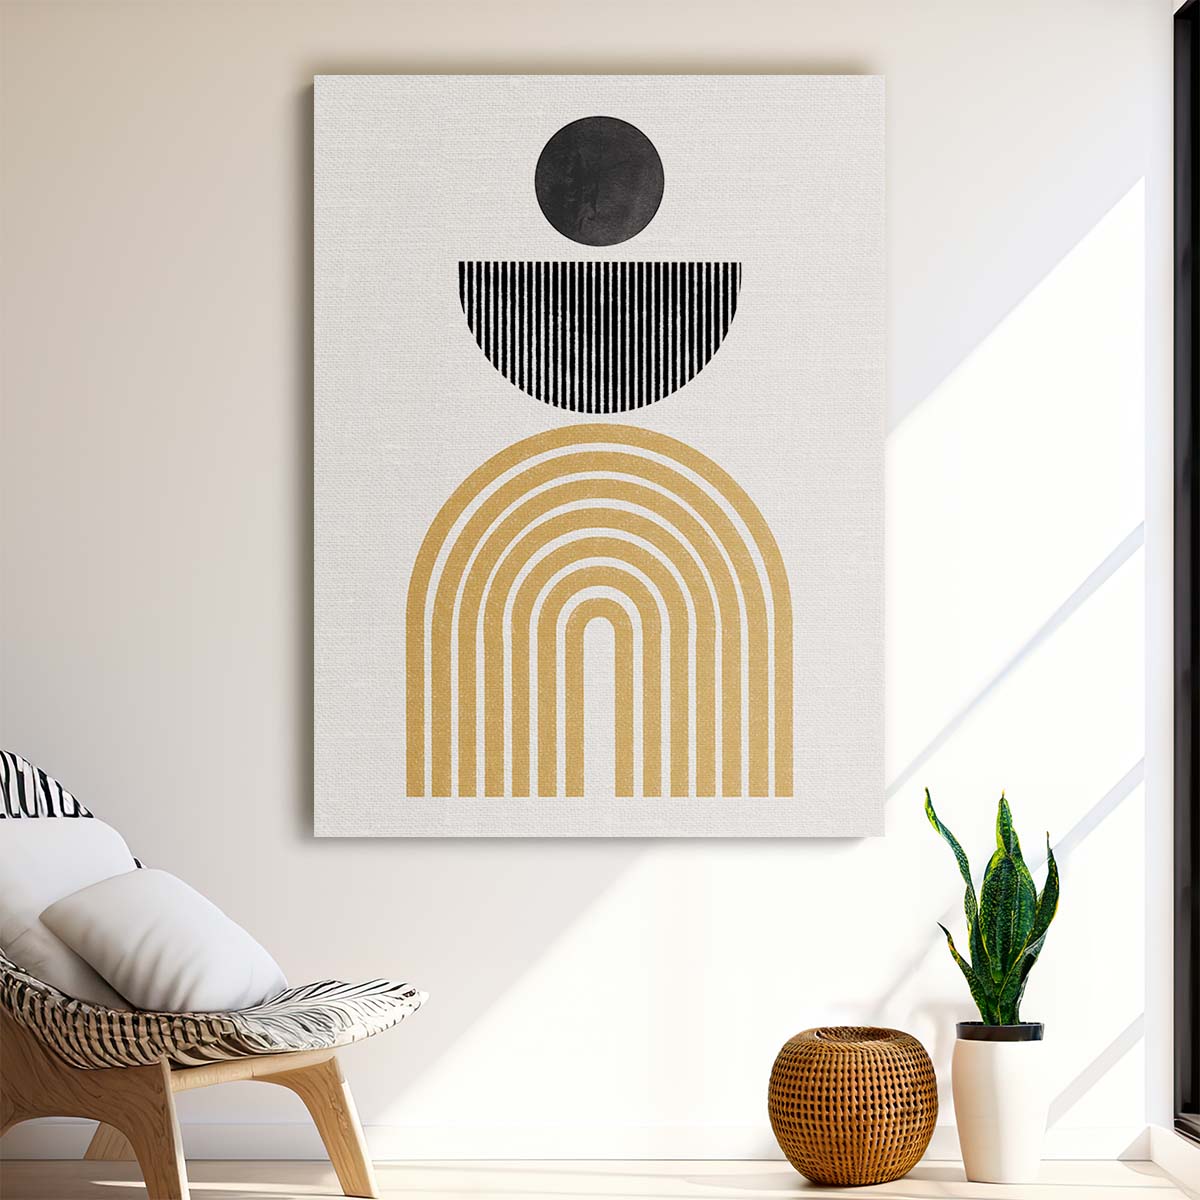 Mid-Century Geometric Abstract Illustration Art by MIUUS STUDIO by Luxuriance Designs, made in USA